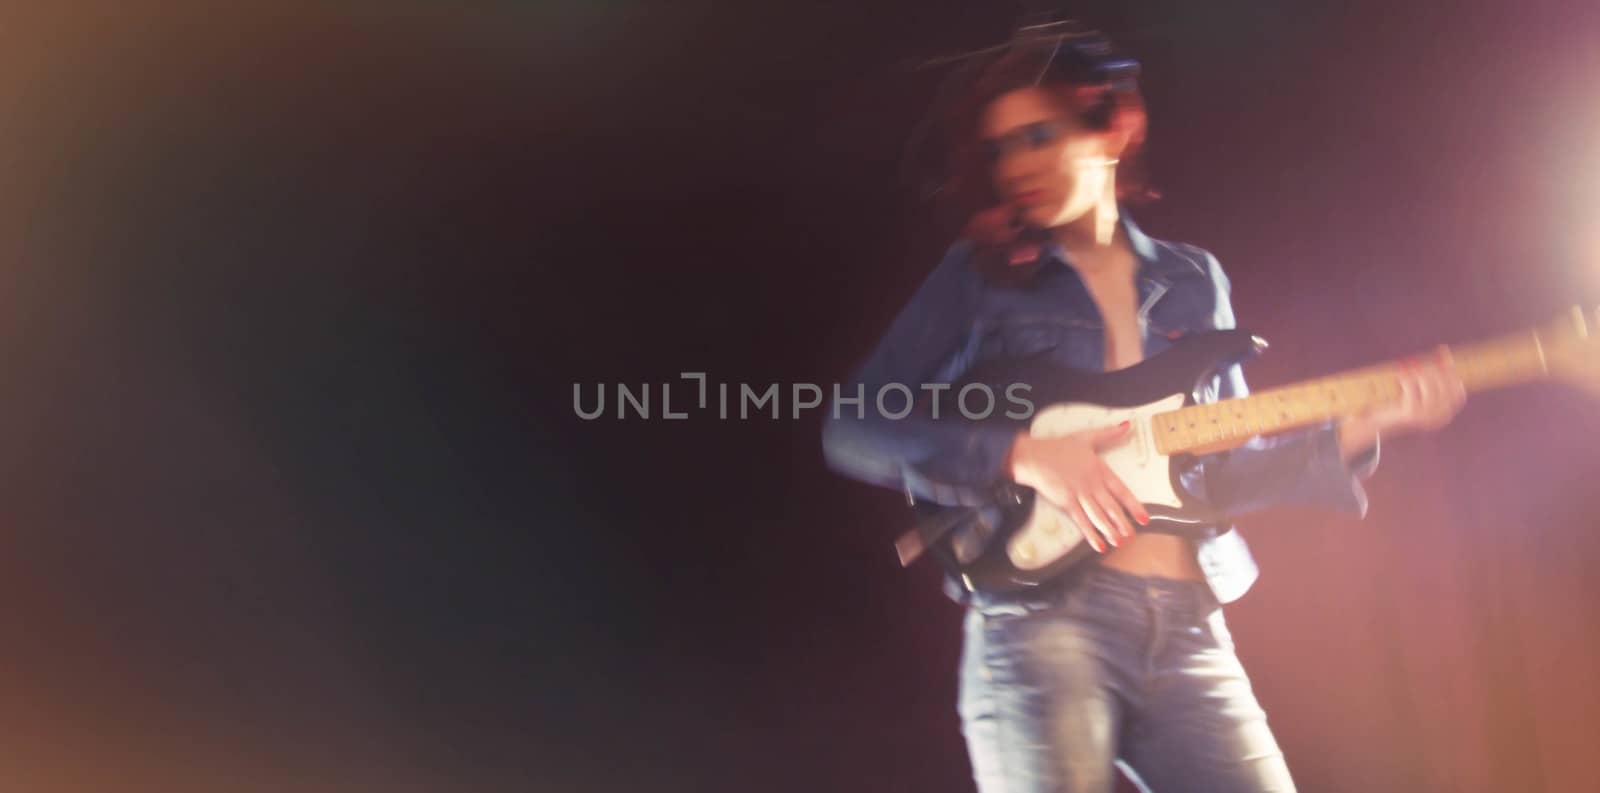 woman play electric guitar by fadeinphotography